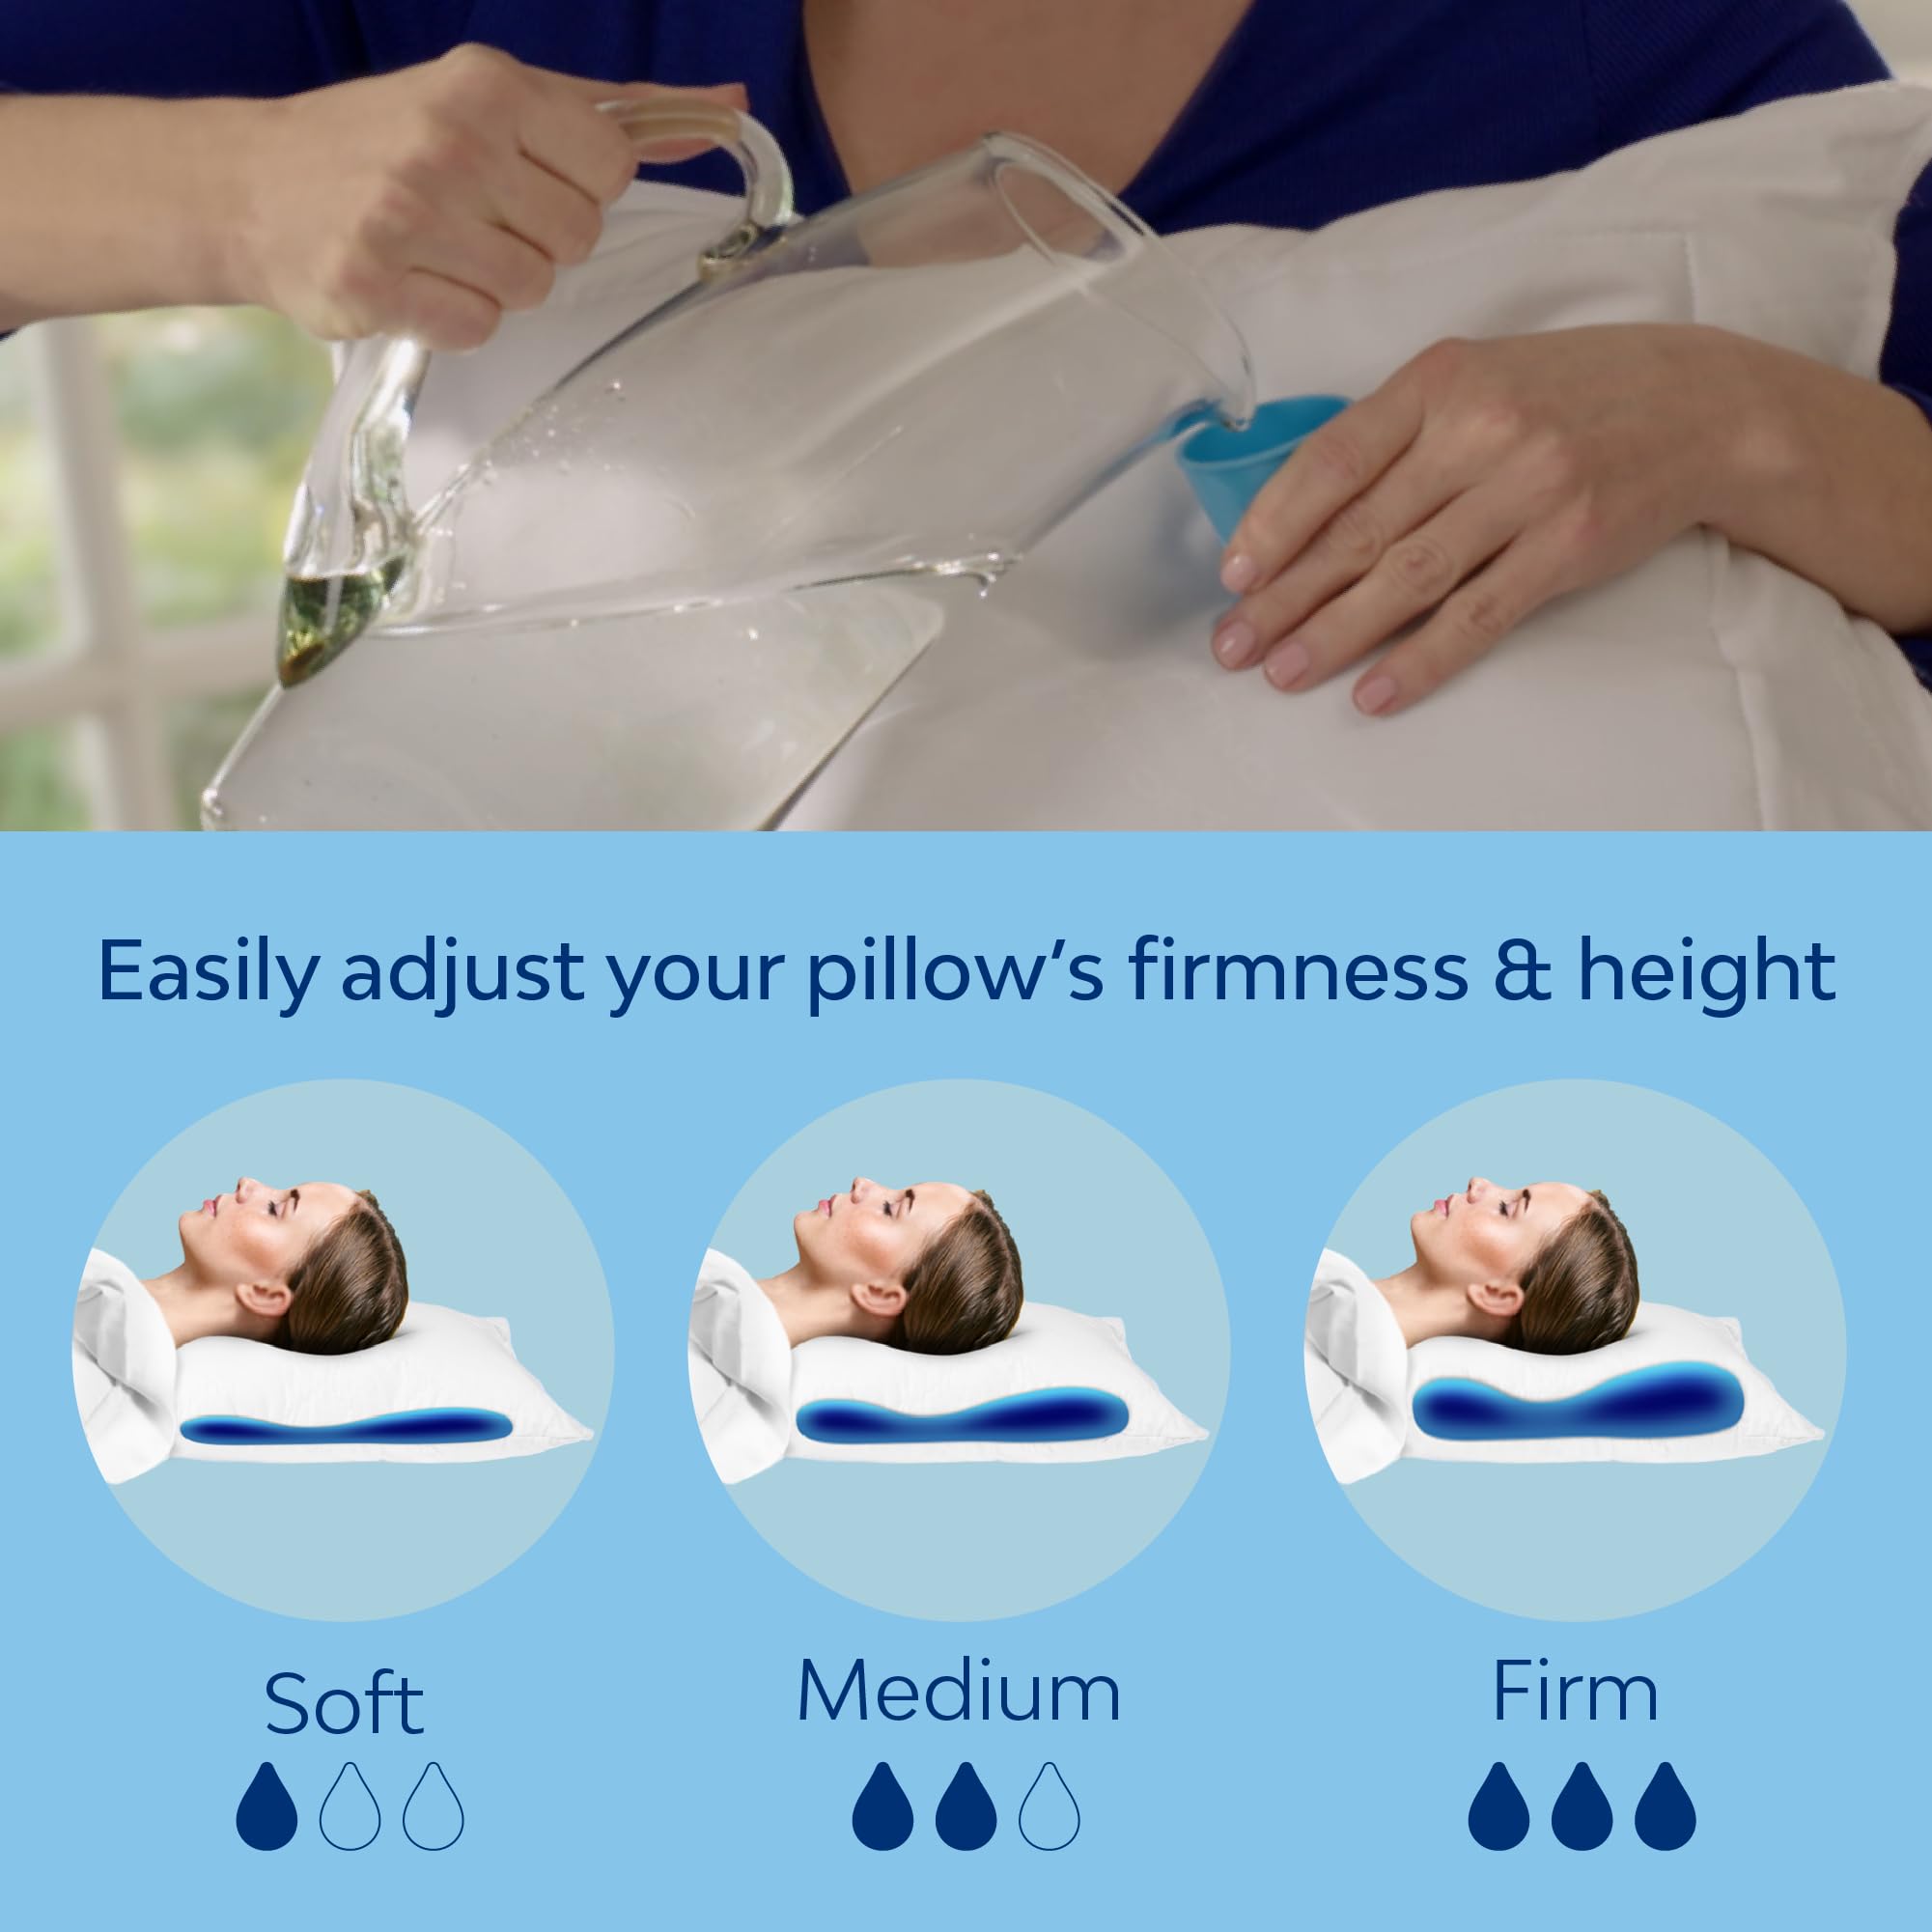 Mediflow Water Pillow Memory Foam re-Invented with Waterbase Technology - Clinically Proven to Reduce Neck Pain & Improve Sleep Quality. (Value Pack)